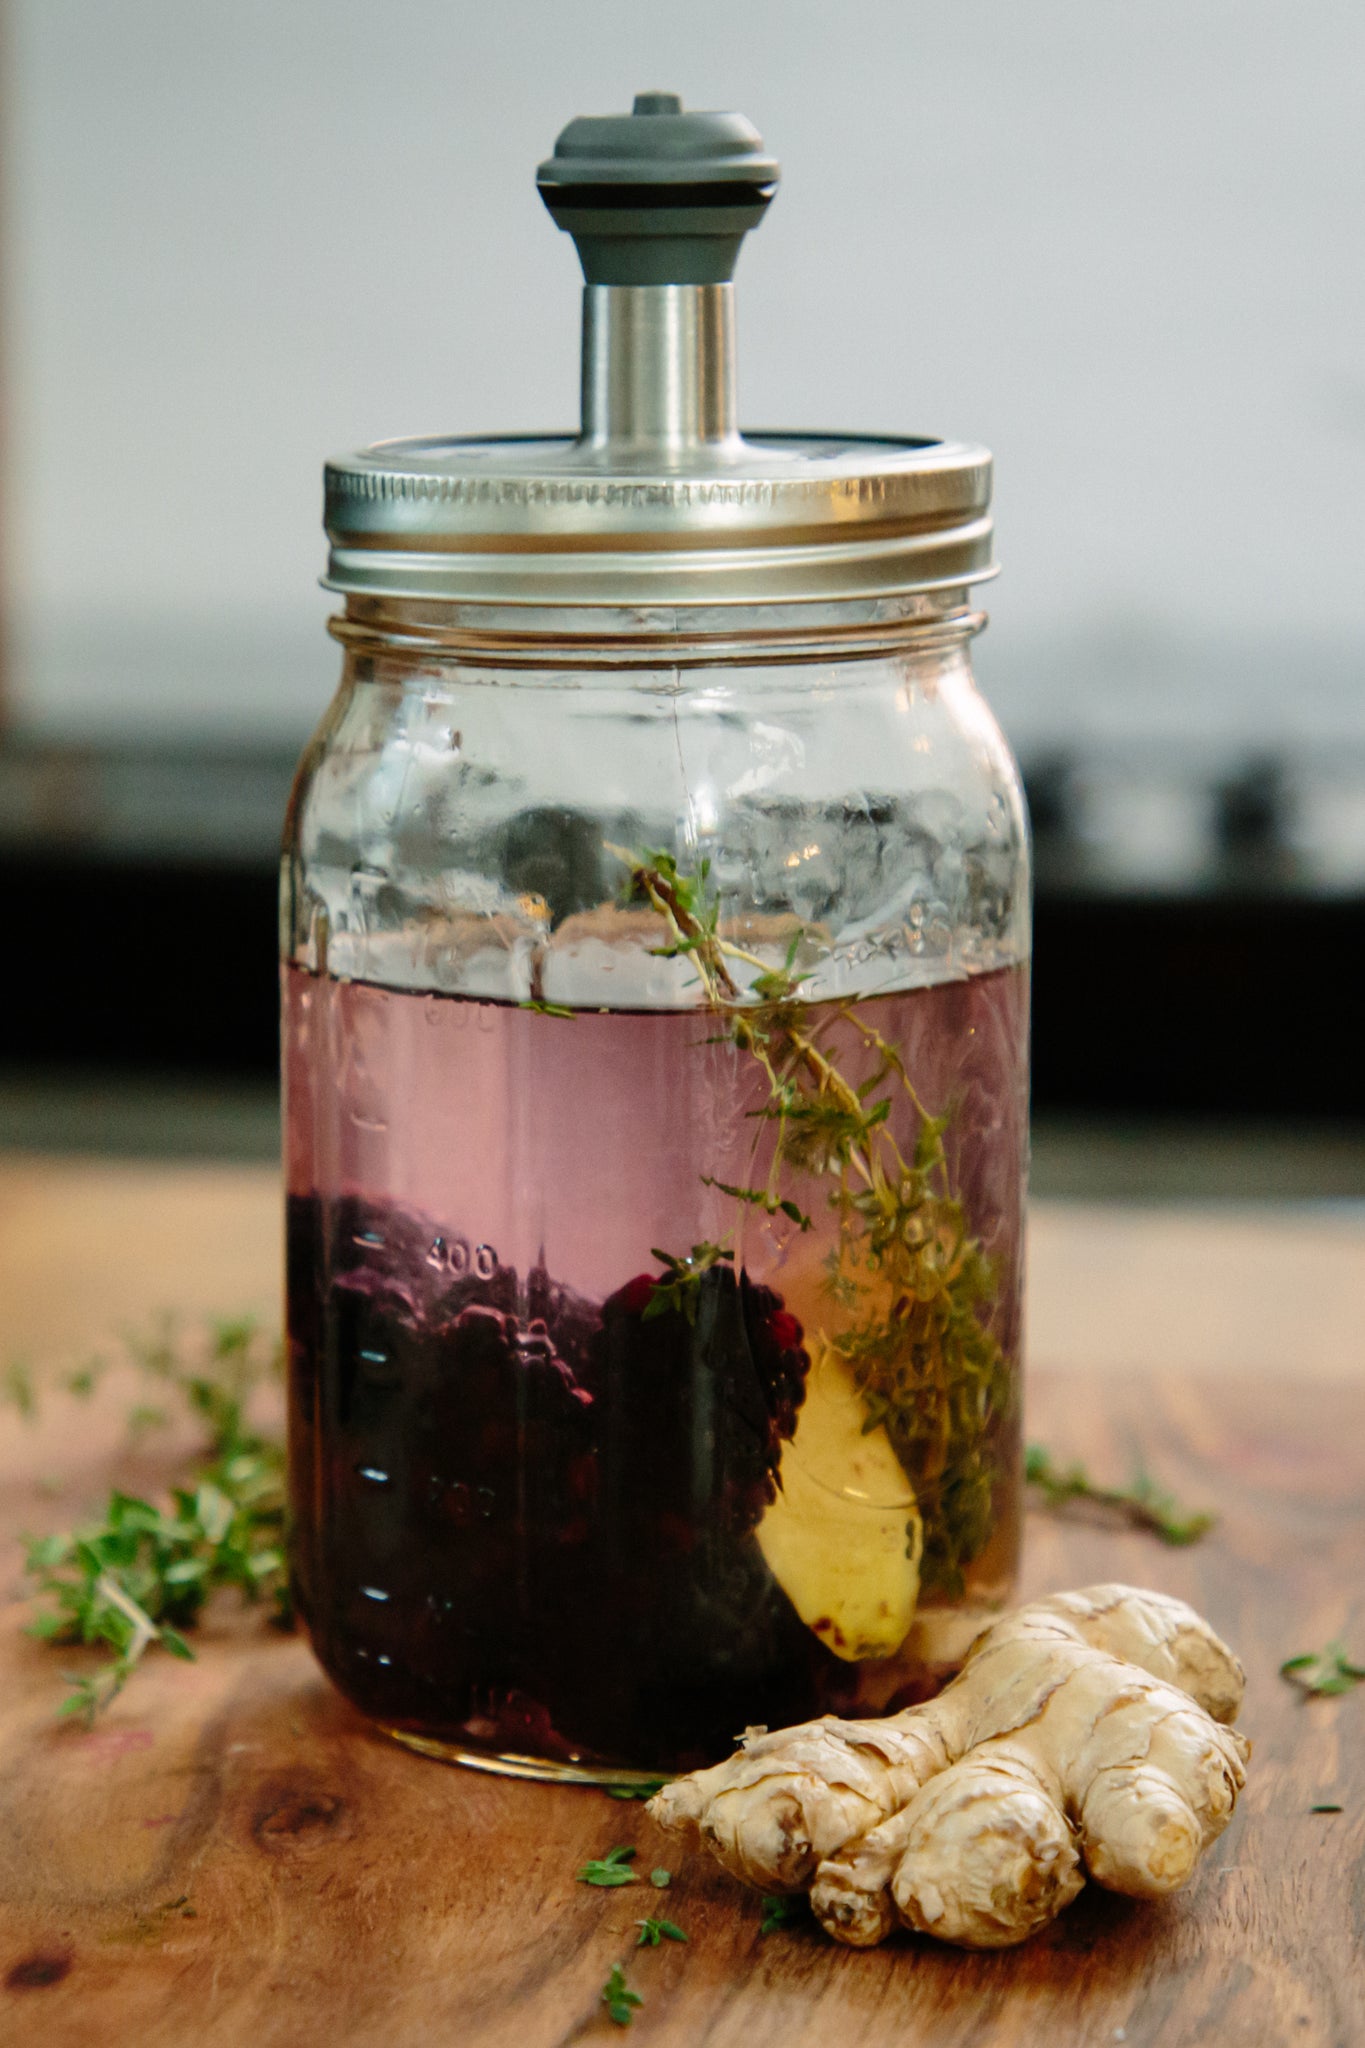 Kaug LidAdapt 2.0 featured in our Culinary Kit Medium Batch with LidAdapt 2.0, 32 oz clear glass wide mouth mason jar, vacuum stopper and pump.  A faster way to infuse gin using vacuum sealing. Making blackberry, ginger and thyme infused gin.